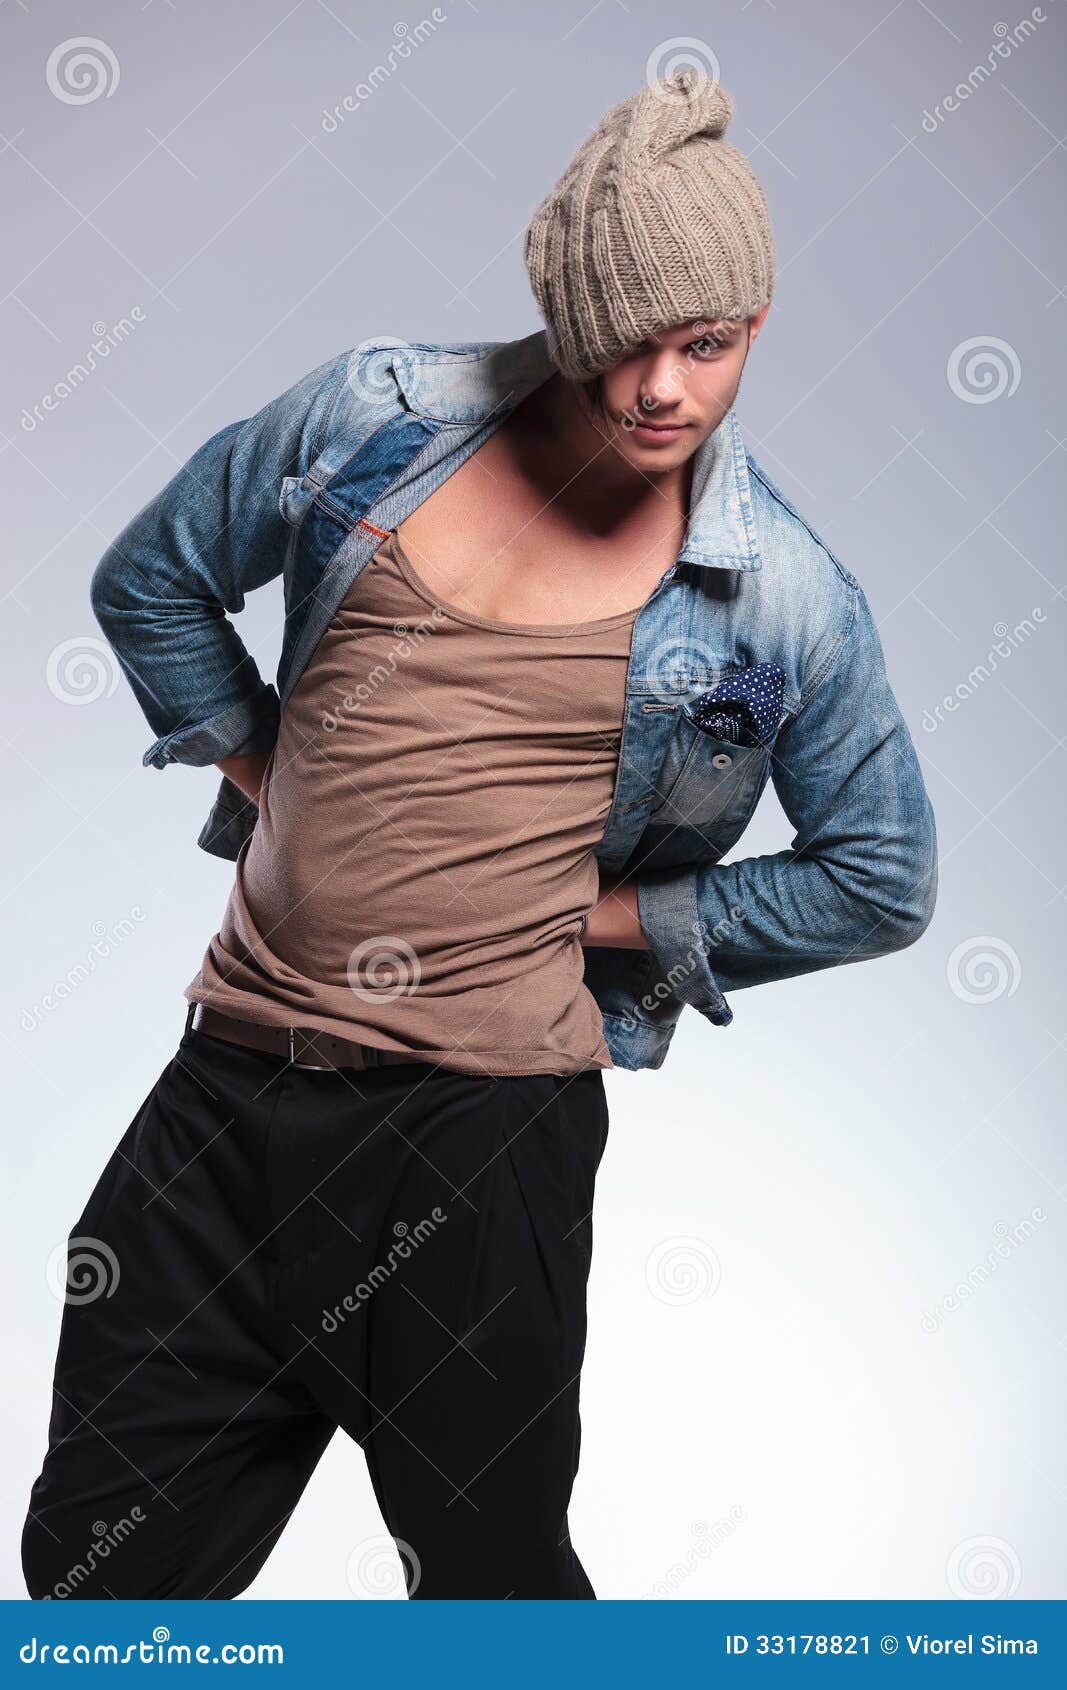 Casual Man With Hands On Hips And Hat Stock Image - Image 